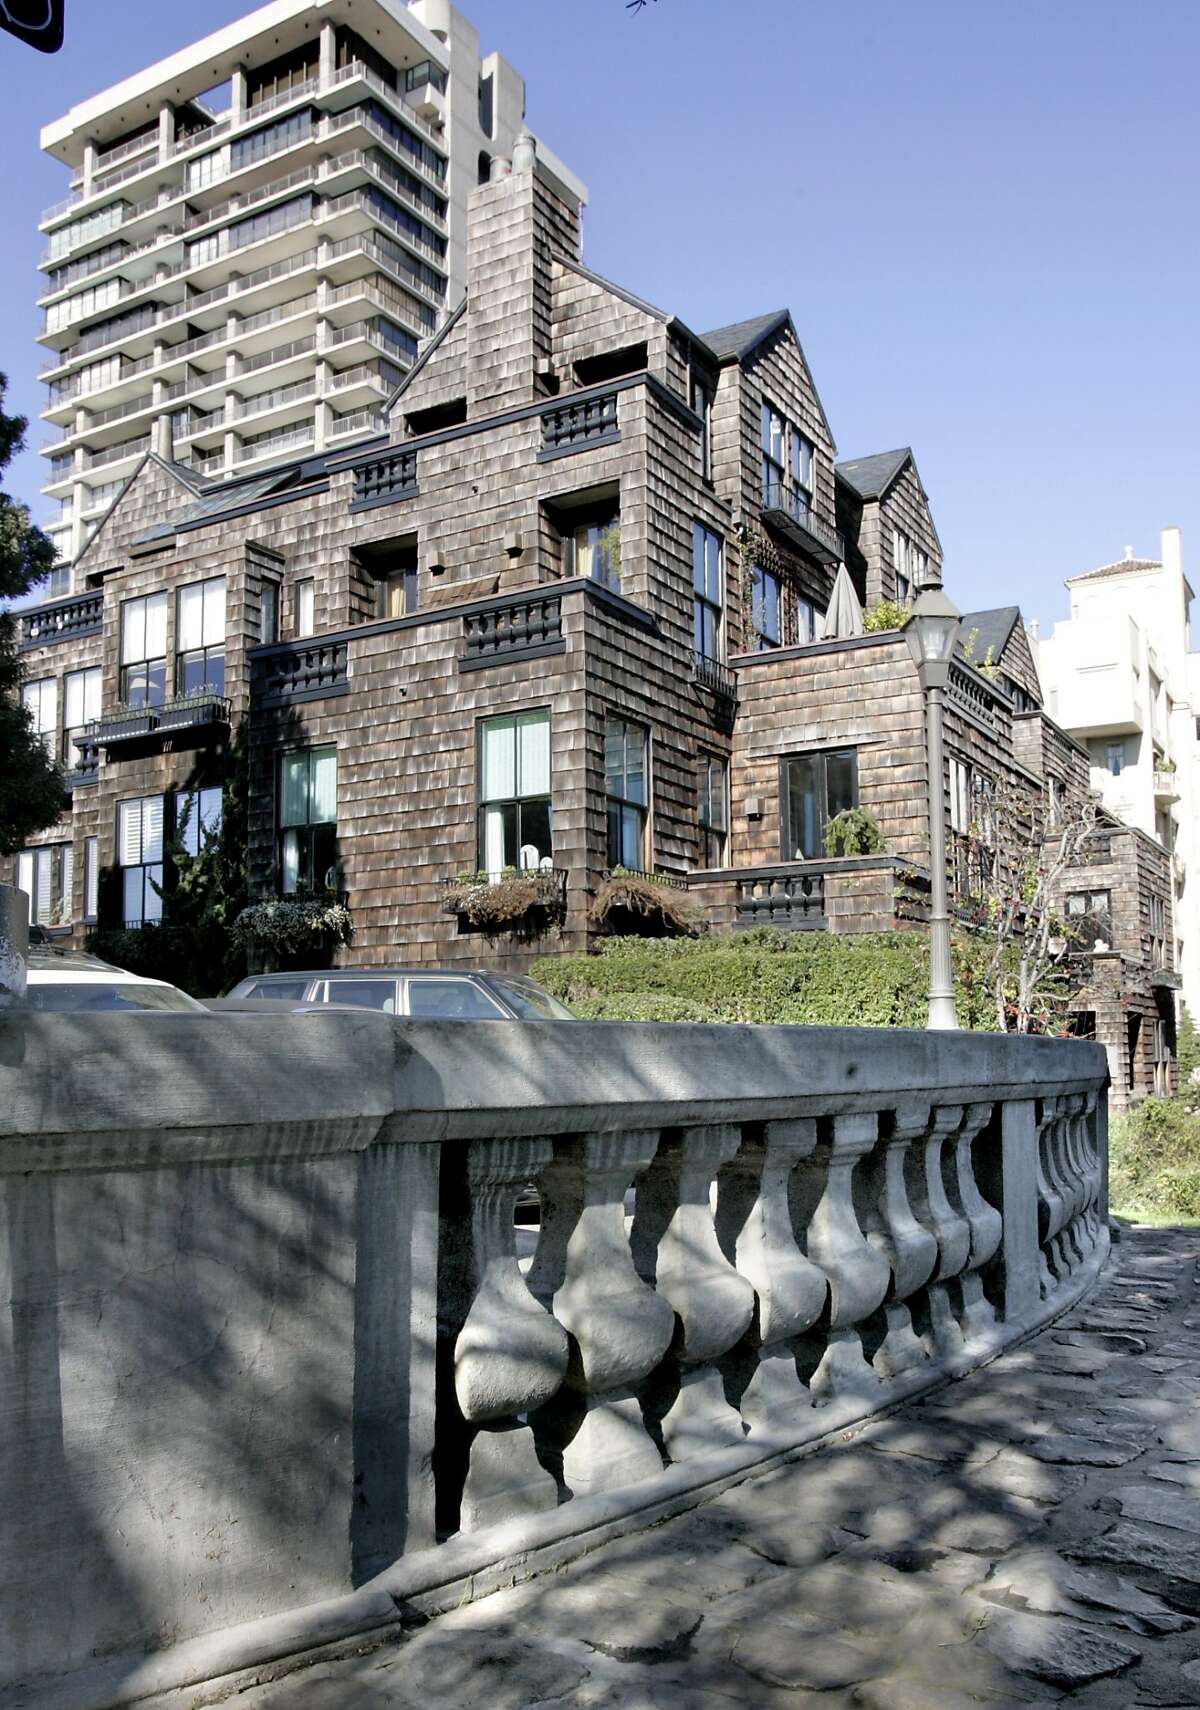 SIGSTYLE04_rad.jpg Home and Garden story about architect George Romsey. SHOWN: at 1020 Vallejo St. in San Francisco we find The Hermitage Condominiums. The Hermitage adopts the shingled, black-trimmed look that another architect, Willis Polk, used nearby. The Hermitage also copies the balusters that Willis Polk designed on a sidewalk nearby. Katy Raddatz / The Chronicle